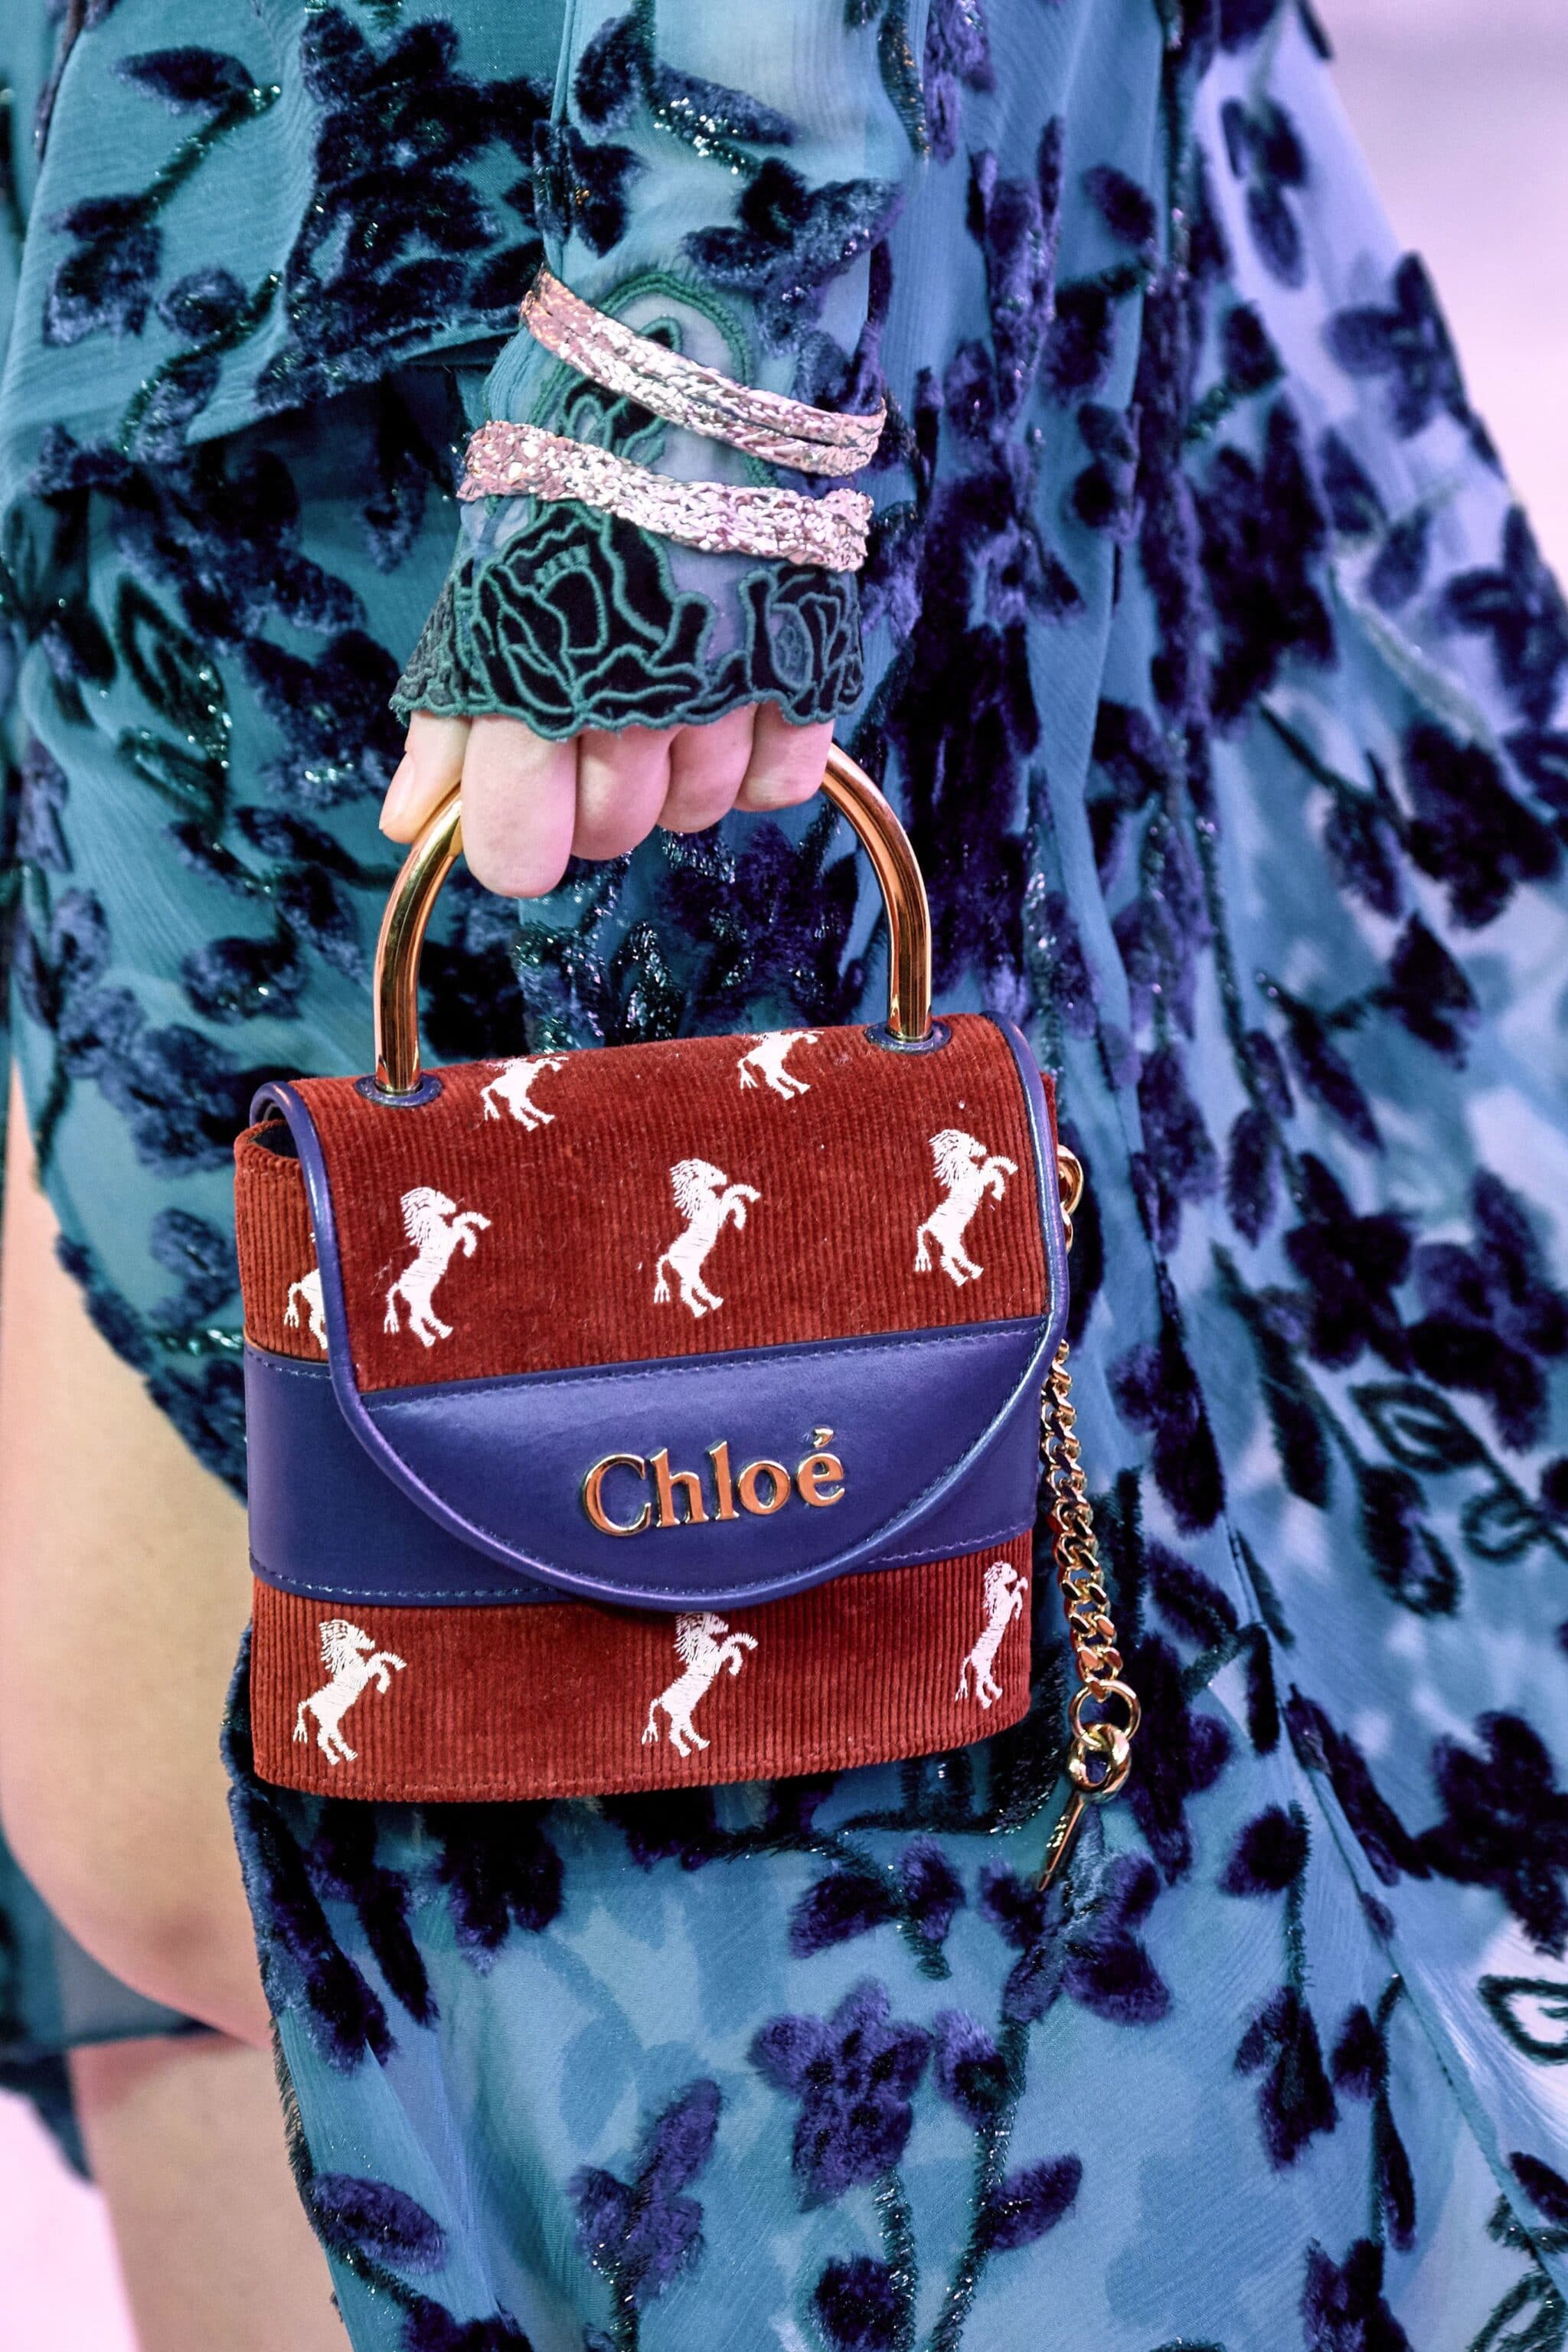 Chloe Fall/Winter 2019 Runway Bag Collection | Spotted Fashion